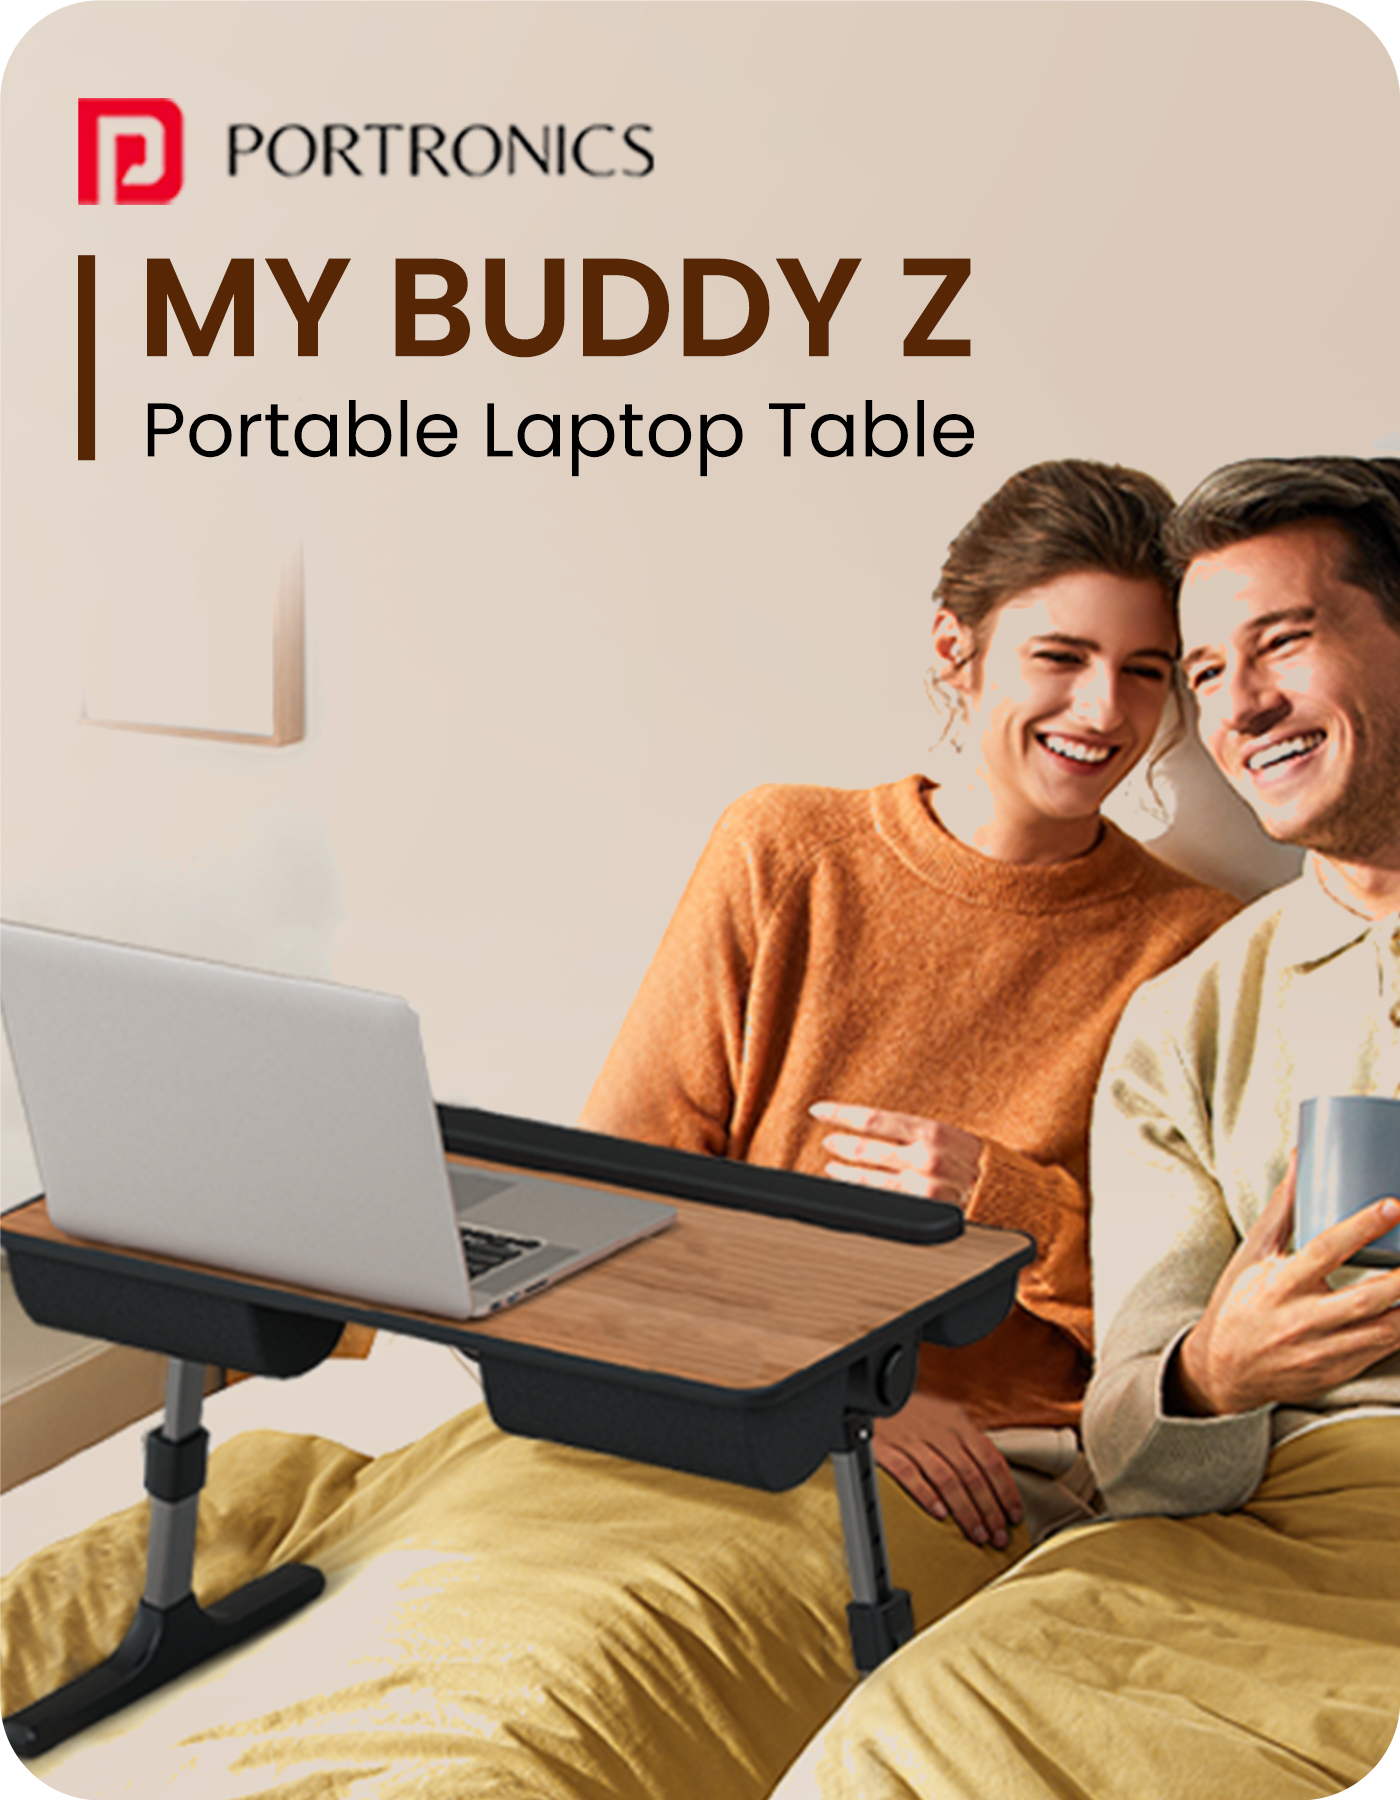 Portronics my buddy z portable laptop desk for bed with anti silicon pad for extra support